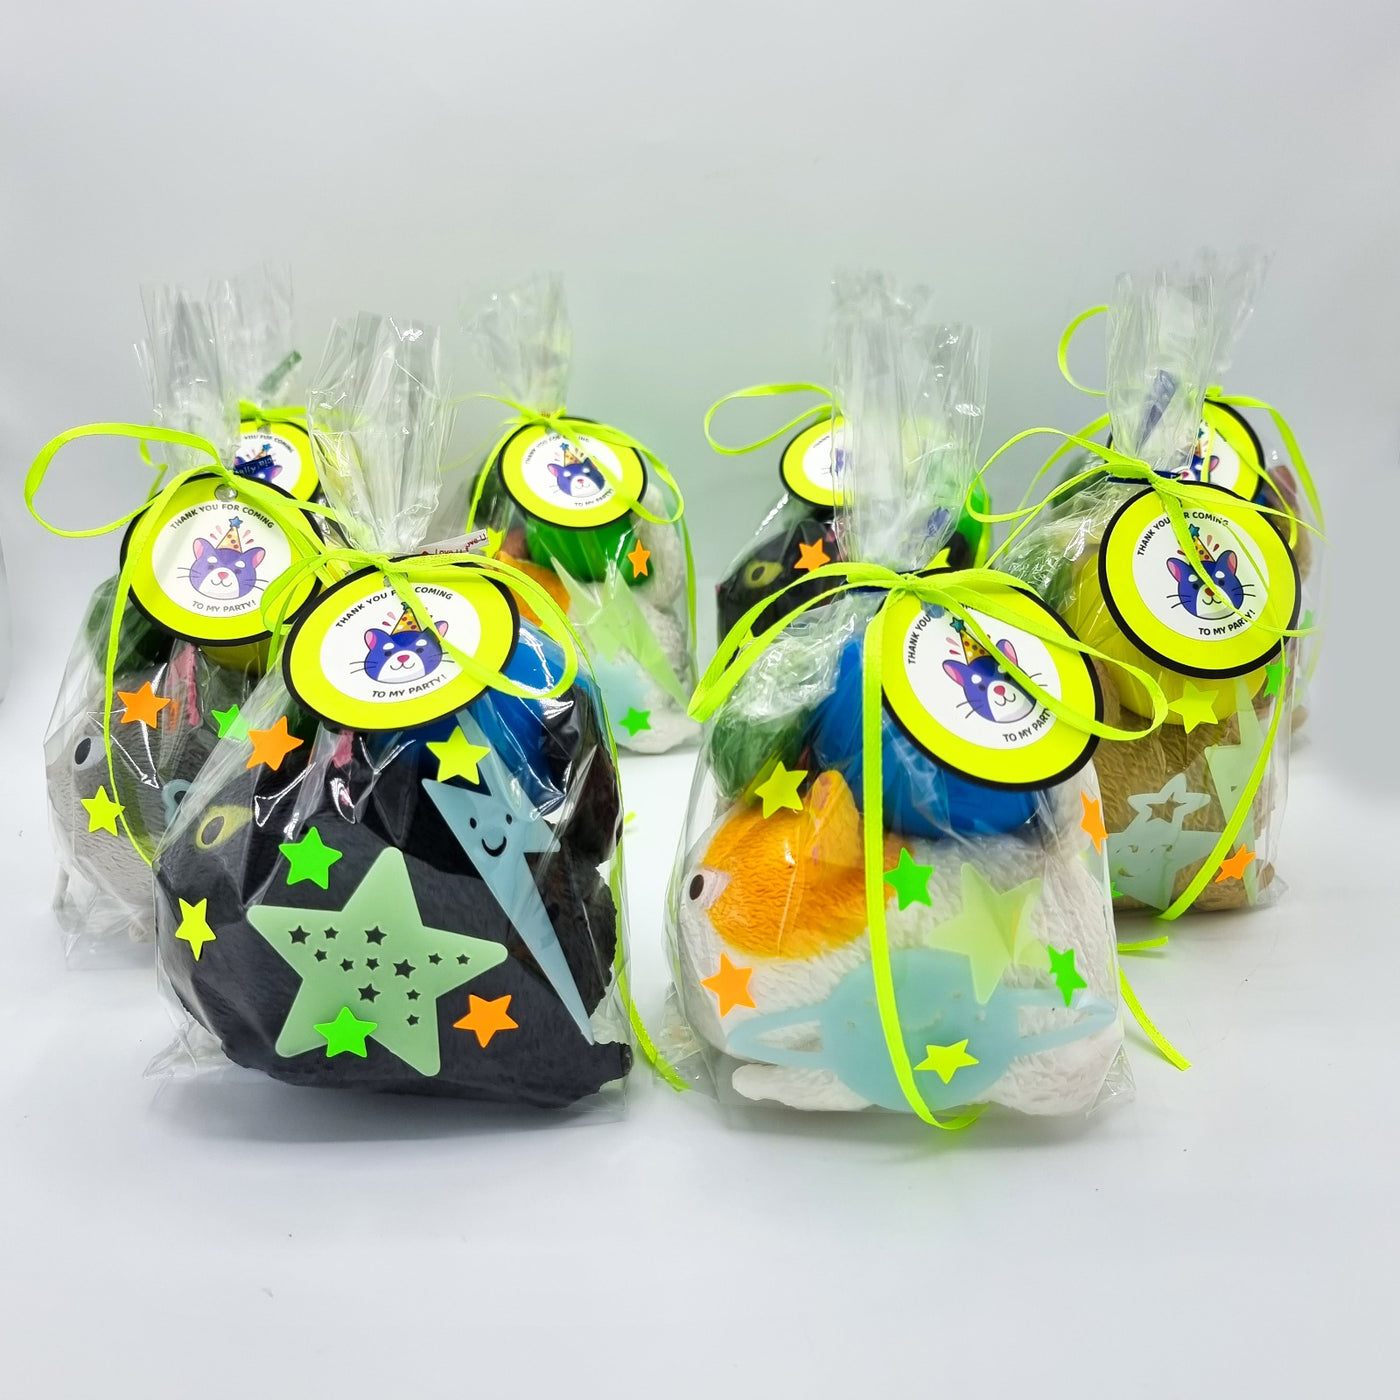 Glow Cat Birthday Party Goody Bags for Boys And Girls With Toys And Sweets.